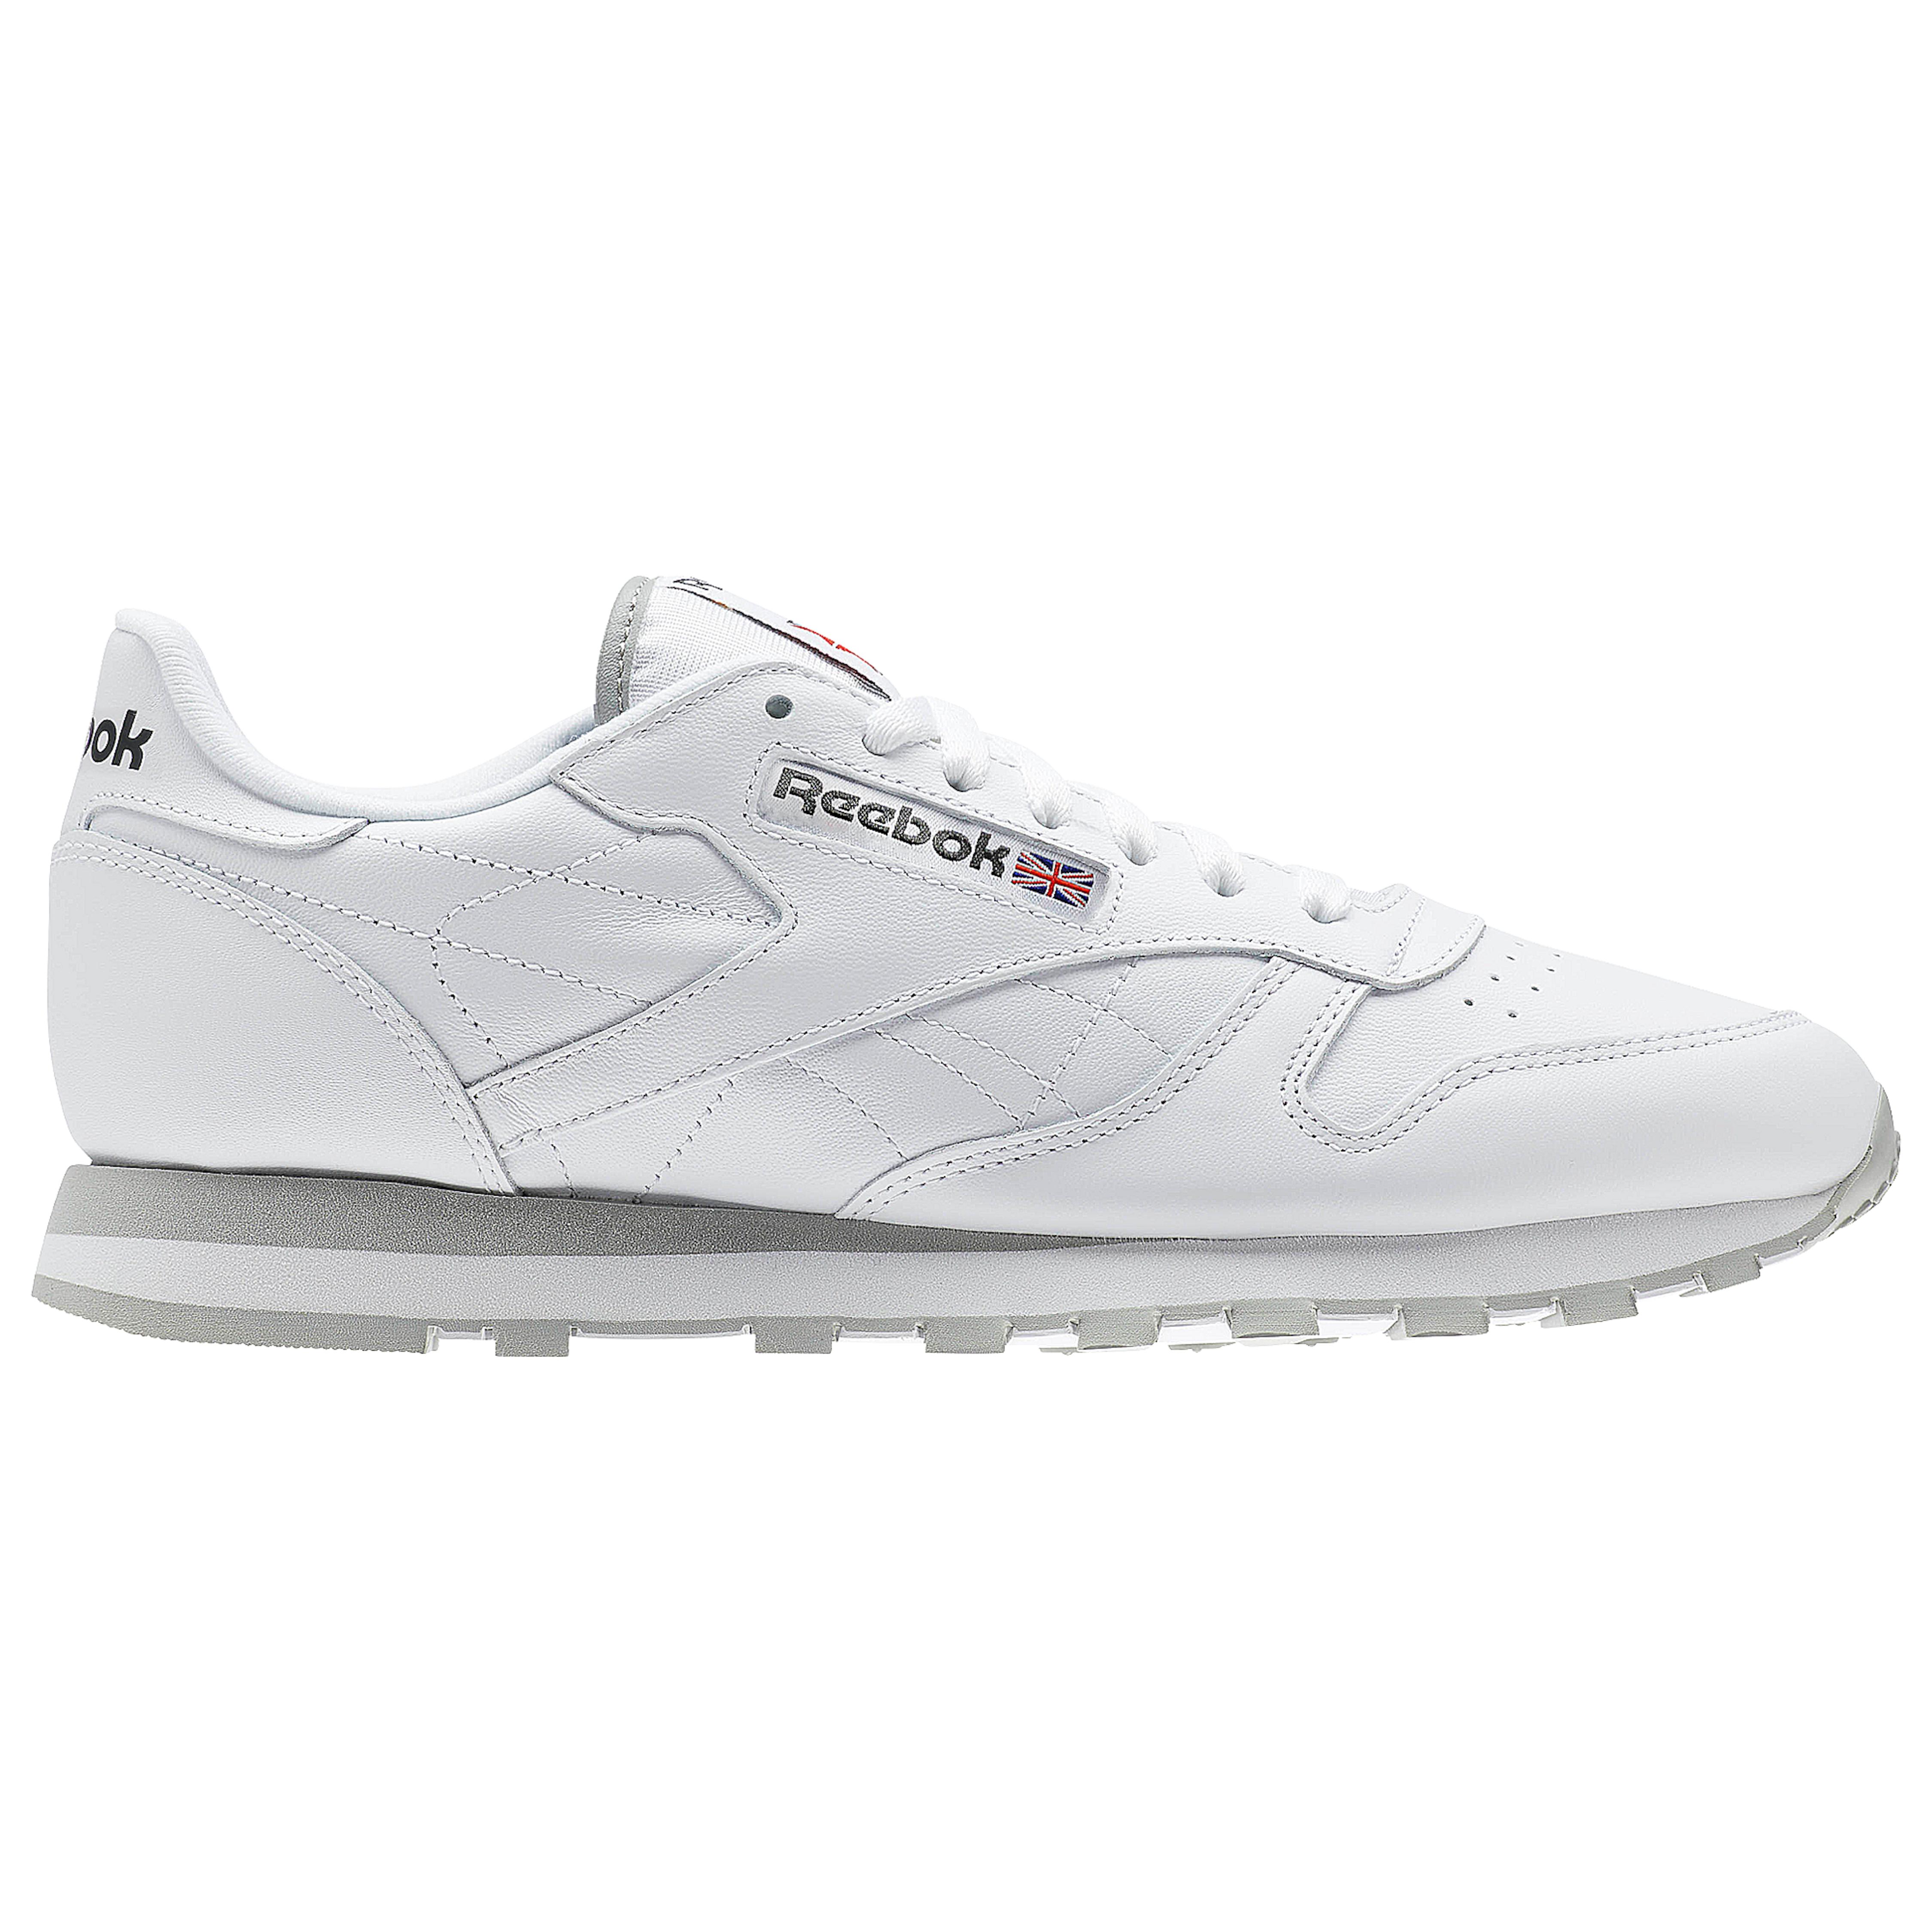 Reebok Classic Leather in White for Men - Save 25% - Lyst